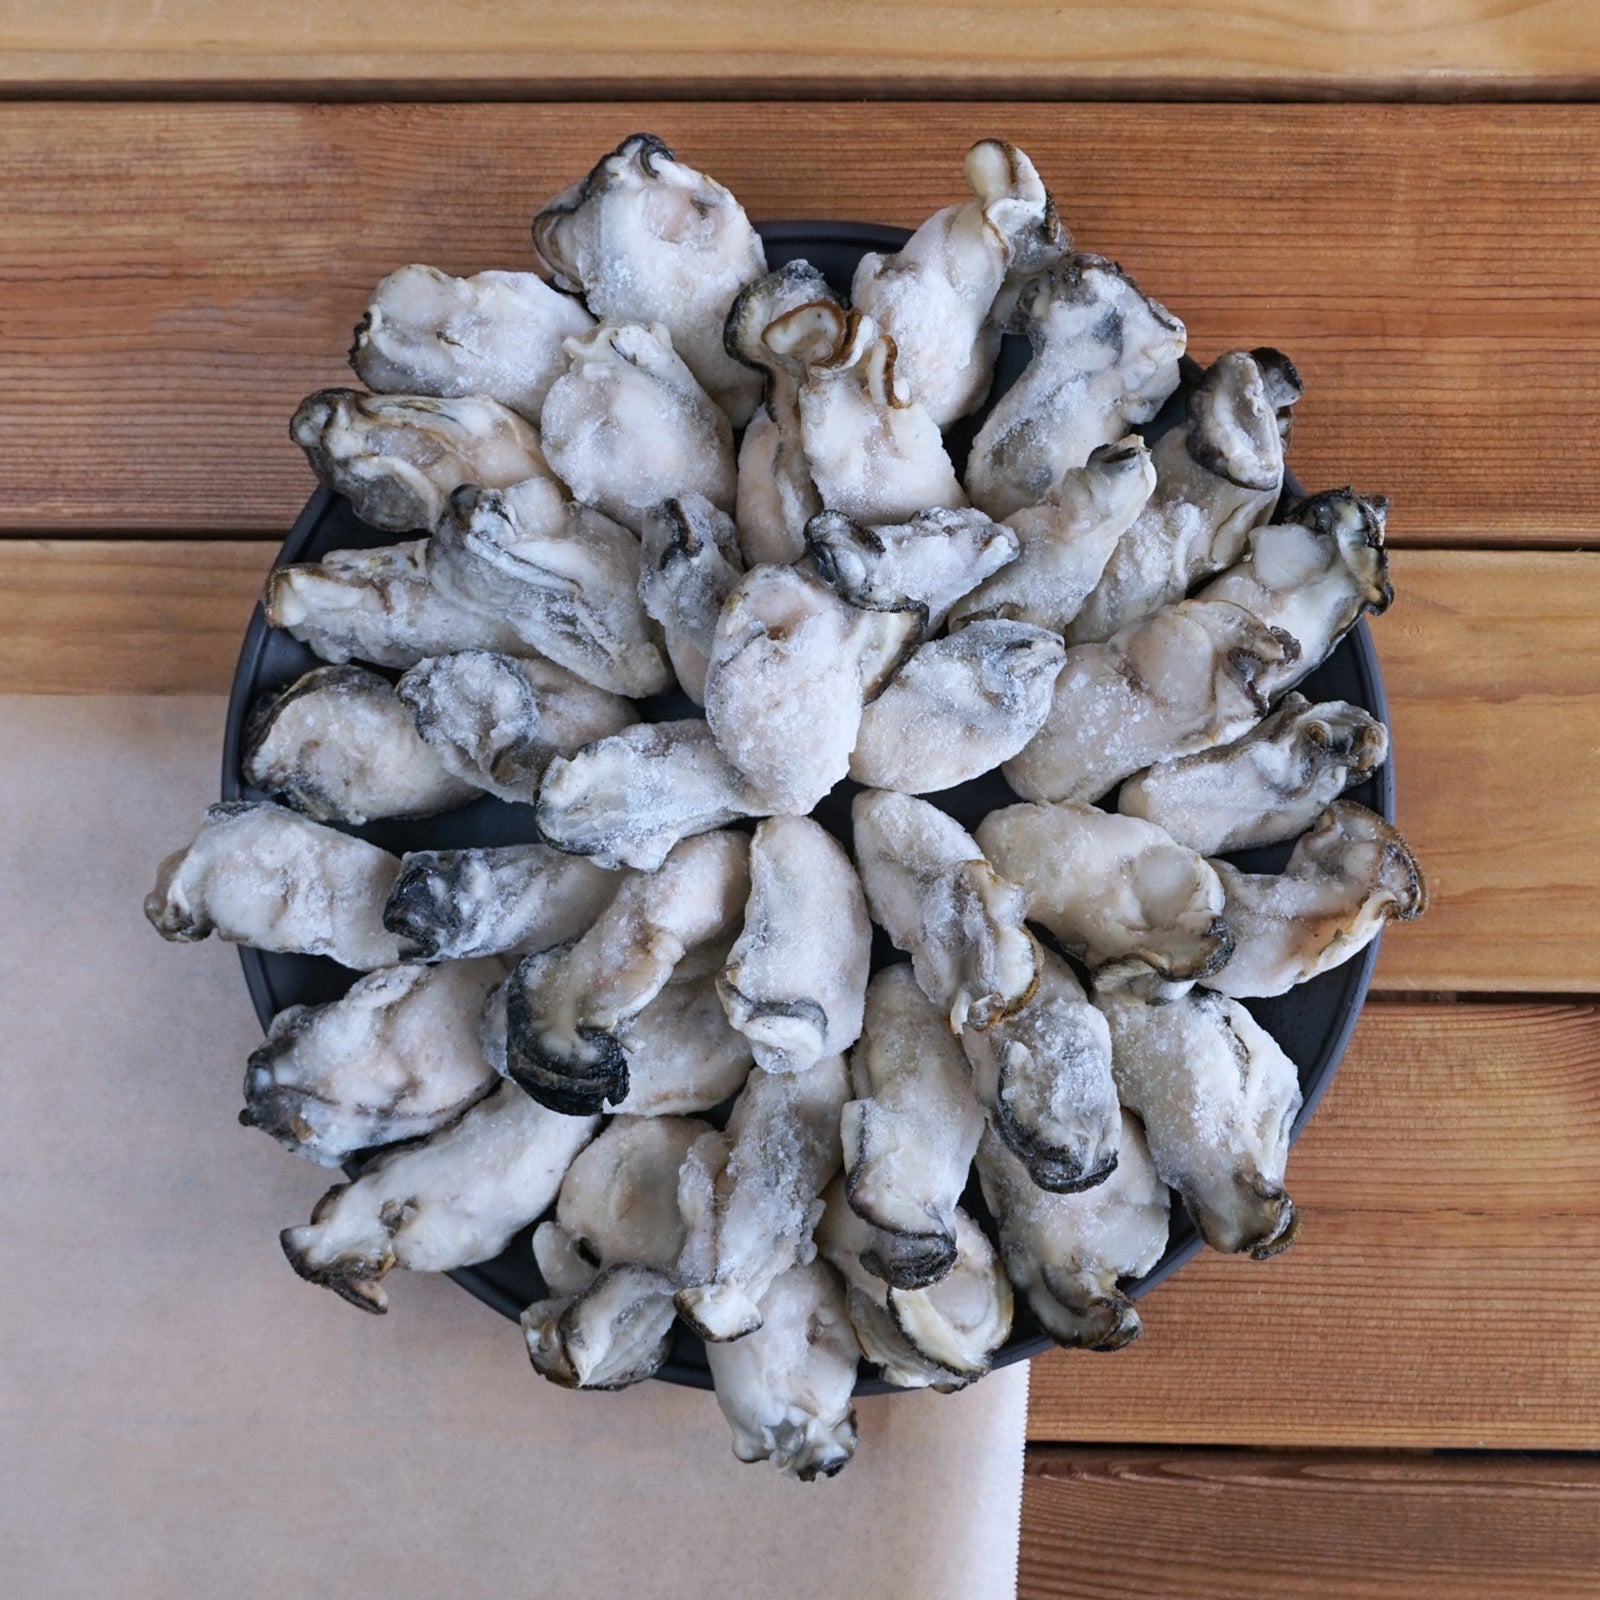 MSC Certified All-Natural Steamed Shucked Oysters from Japan (1kg) - Horizon Farms